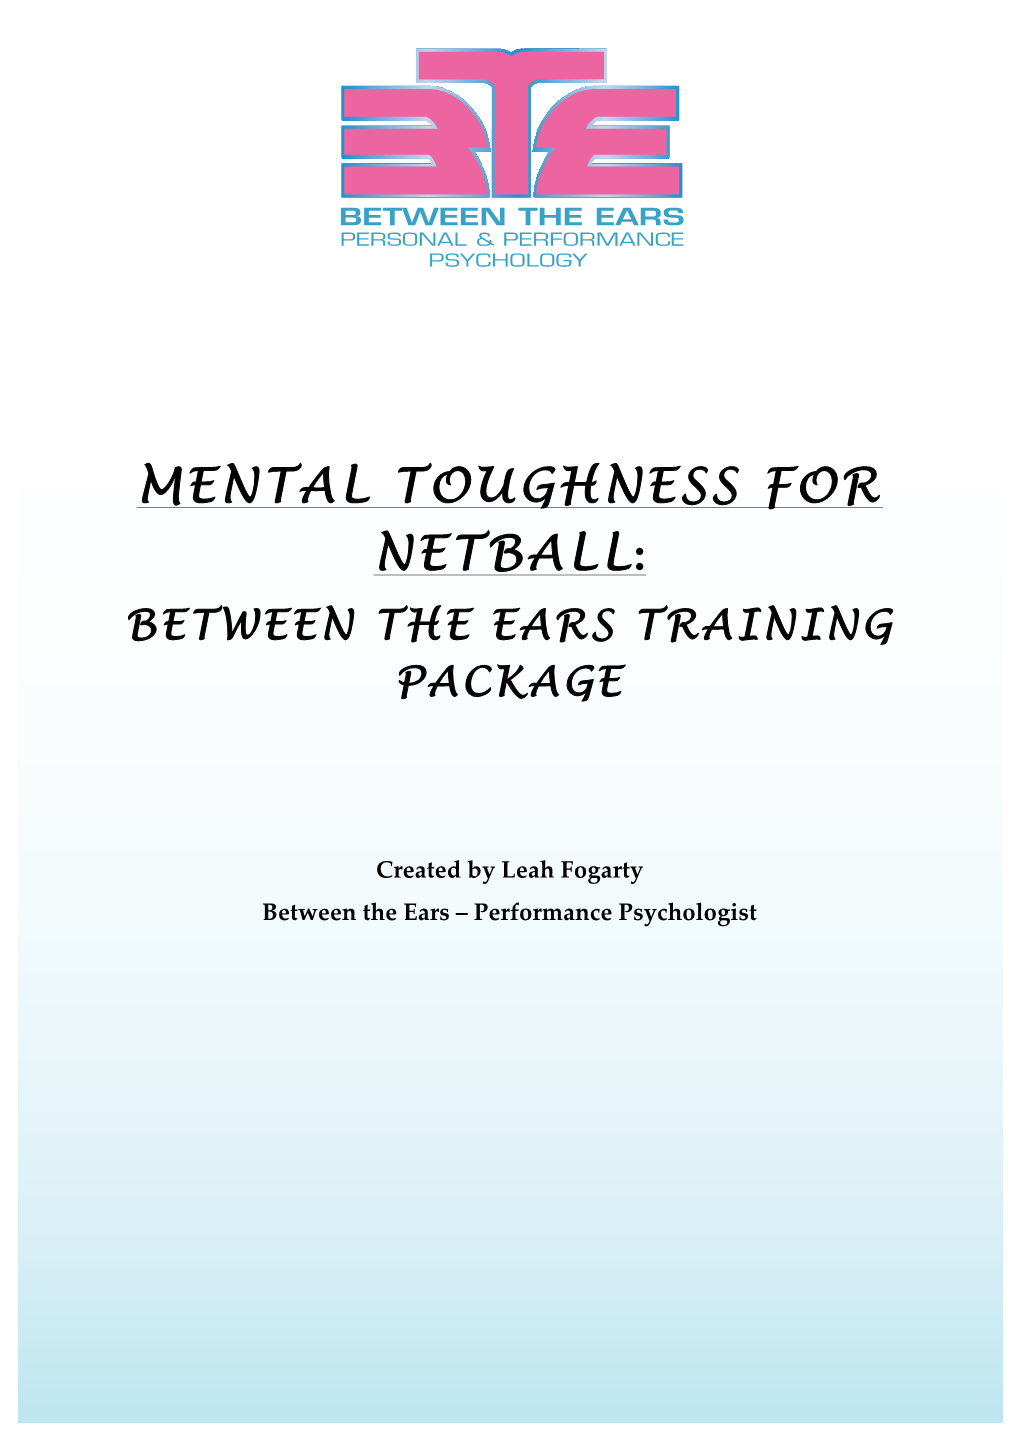 Mental Toughness for Netball: Between the Ears Training Package